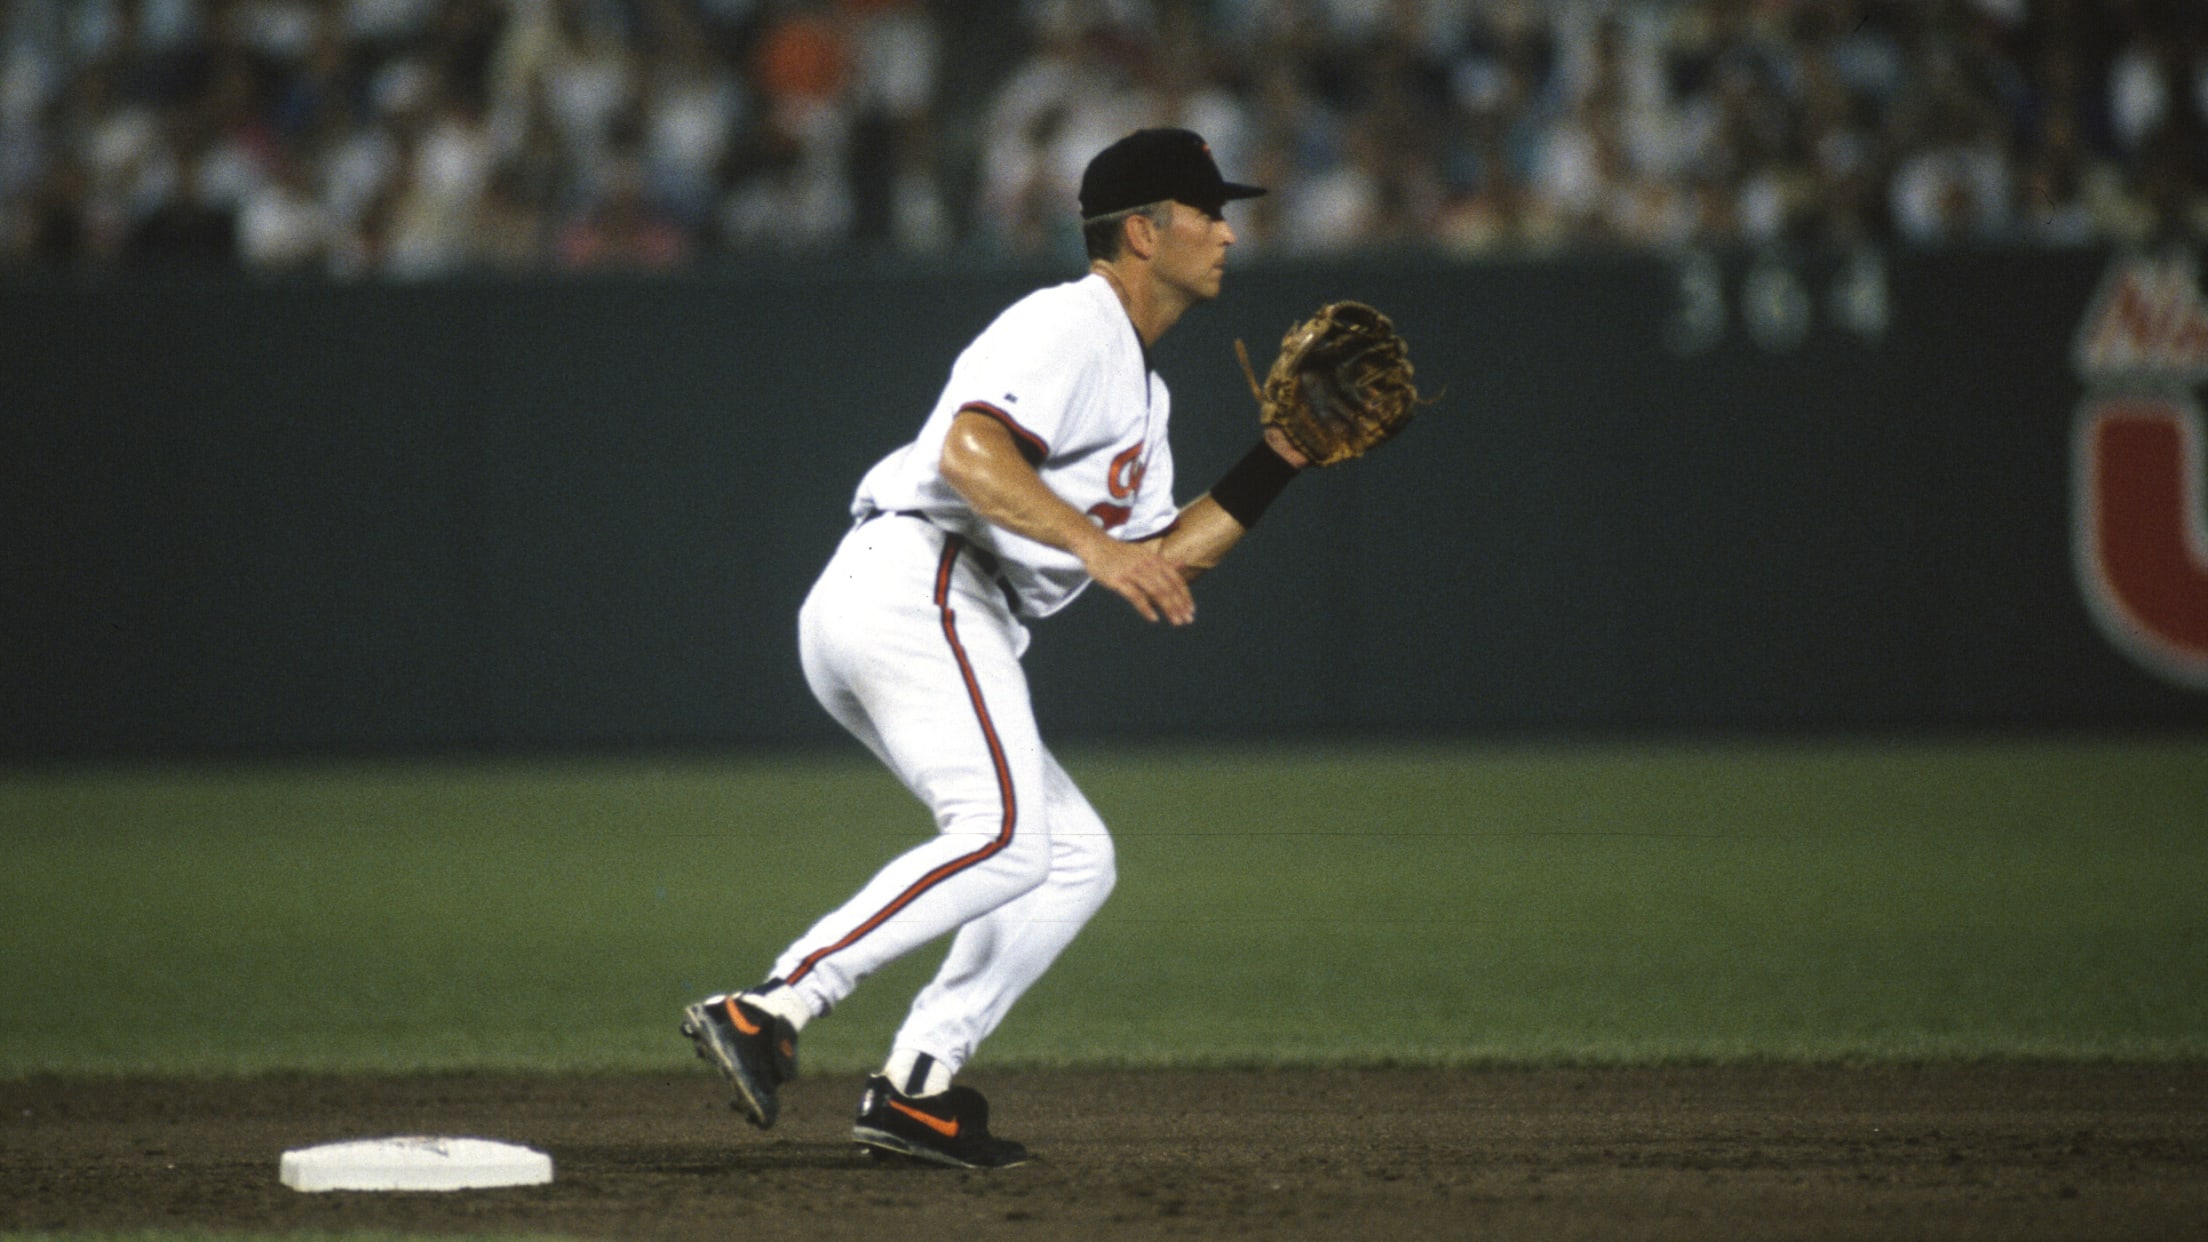 Orioles Top Ten All-Star Moments #2: Camden Yards Hosts the All